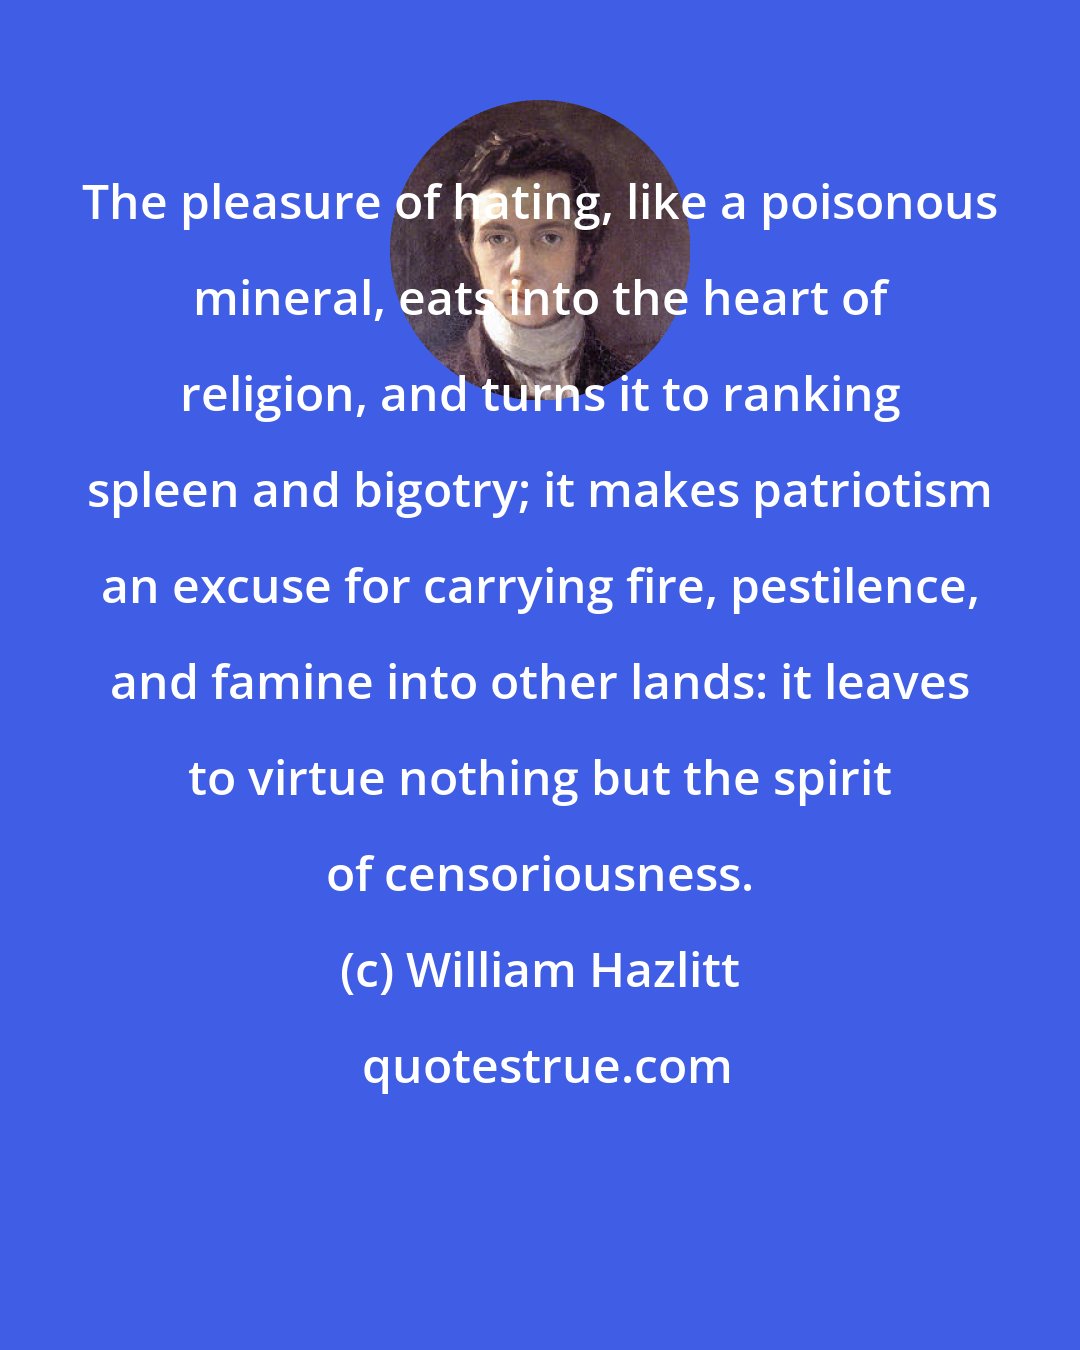 William Hazlitt: The pleasure of hating, like a poisonous mineral, eats into the heart of religion, and turns it to ranking spleen and bigotry; it makes patriotism an excuse for carrying fire, pestilence, and famine into other lands: it leaves to virtue nothing but the spirit of censoriousness.